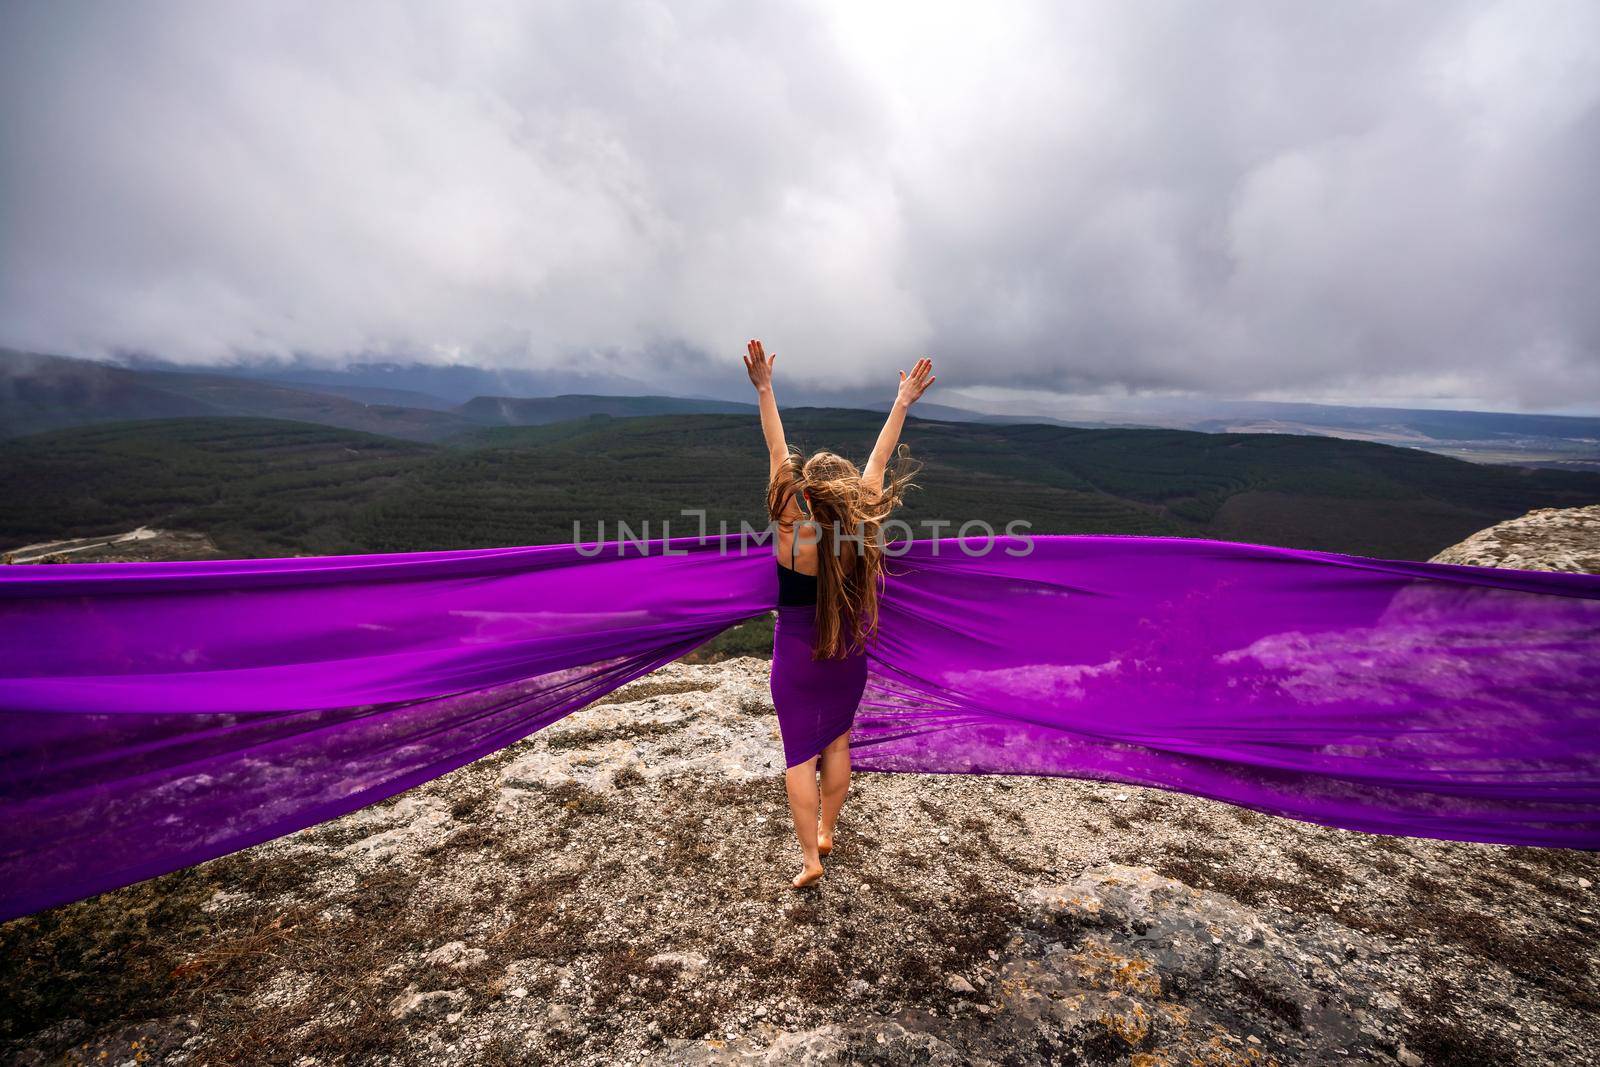 A woman with long hair is standing in a purple flowing dress with a flowing fabric. On the mountain against the background of the sky with clouds